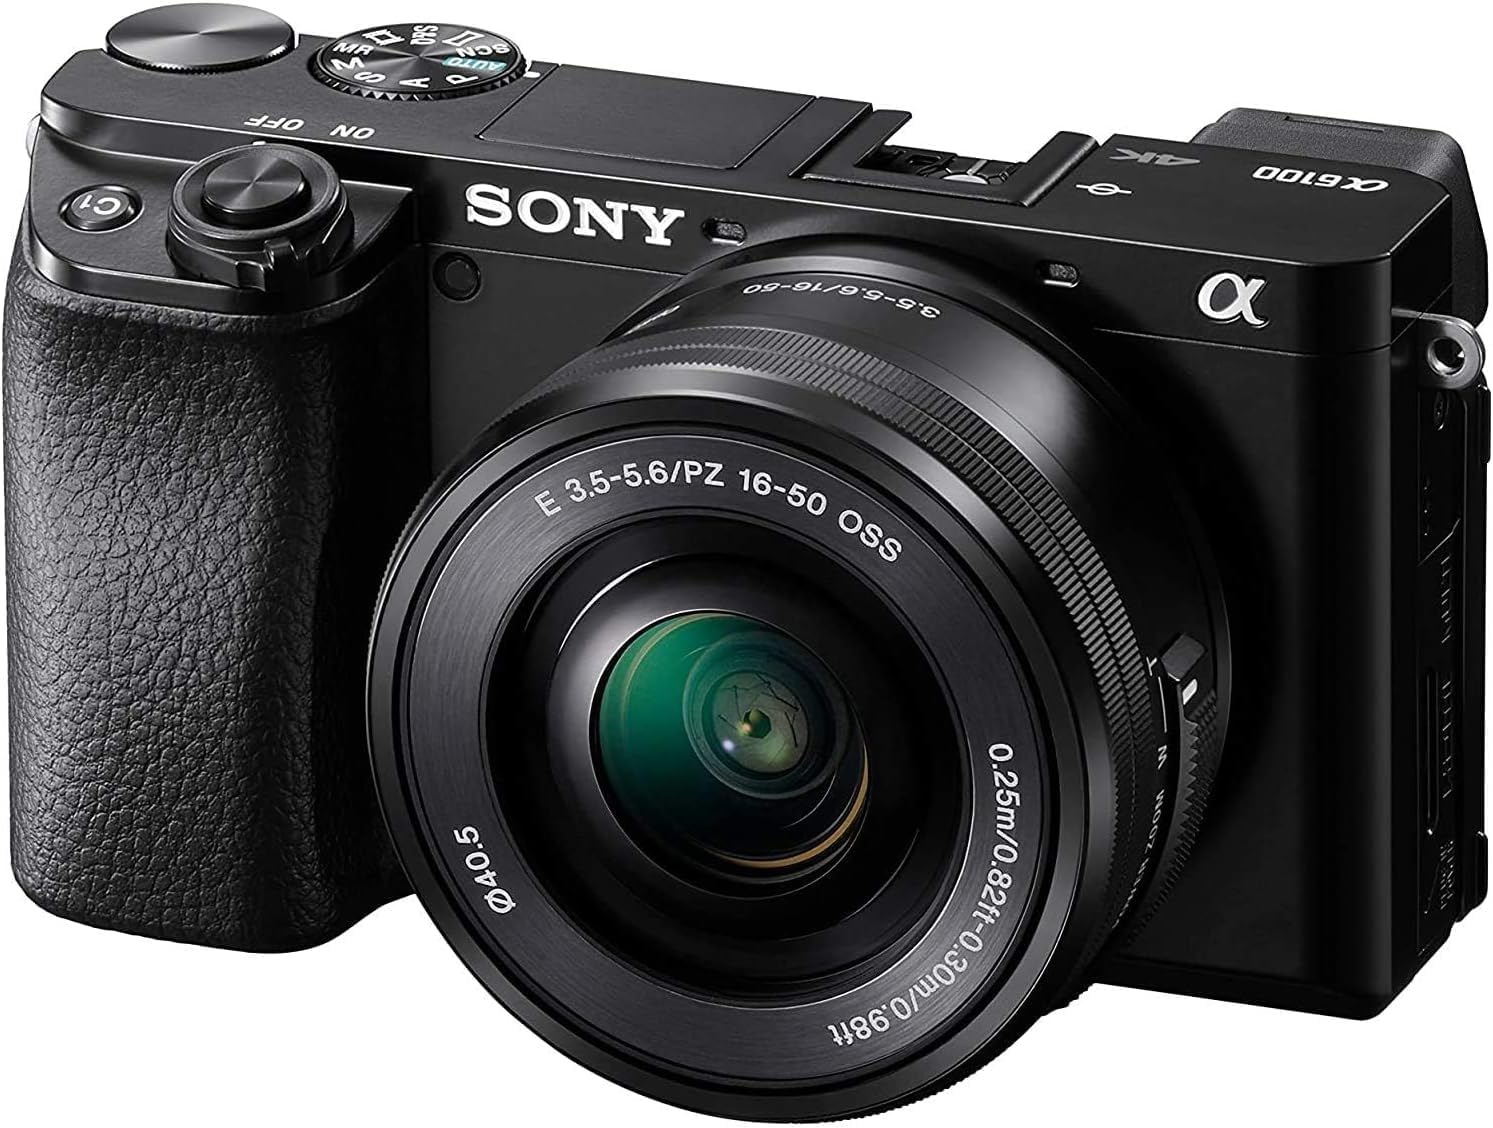 Sony%20Alpha6100%20-%20Best%20small%20and%20functional%20mirrorless%20camera%20-%20Top%20Quality%20and%20performance%20for%20professional%20Photography.jpg